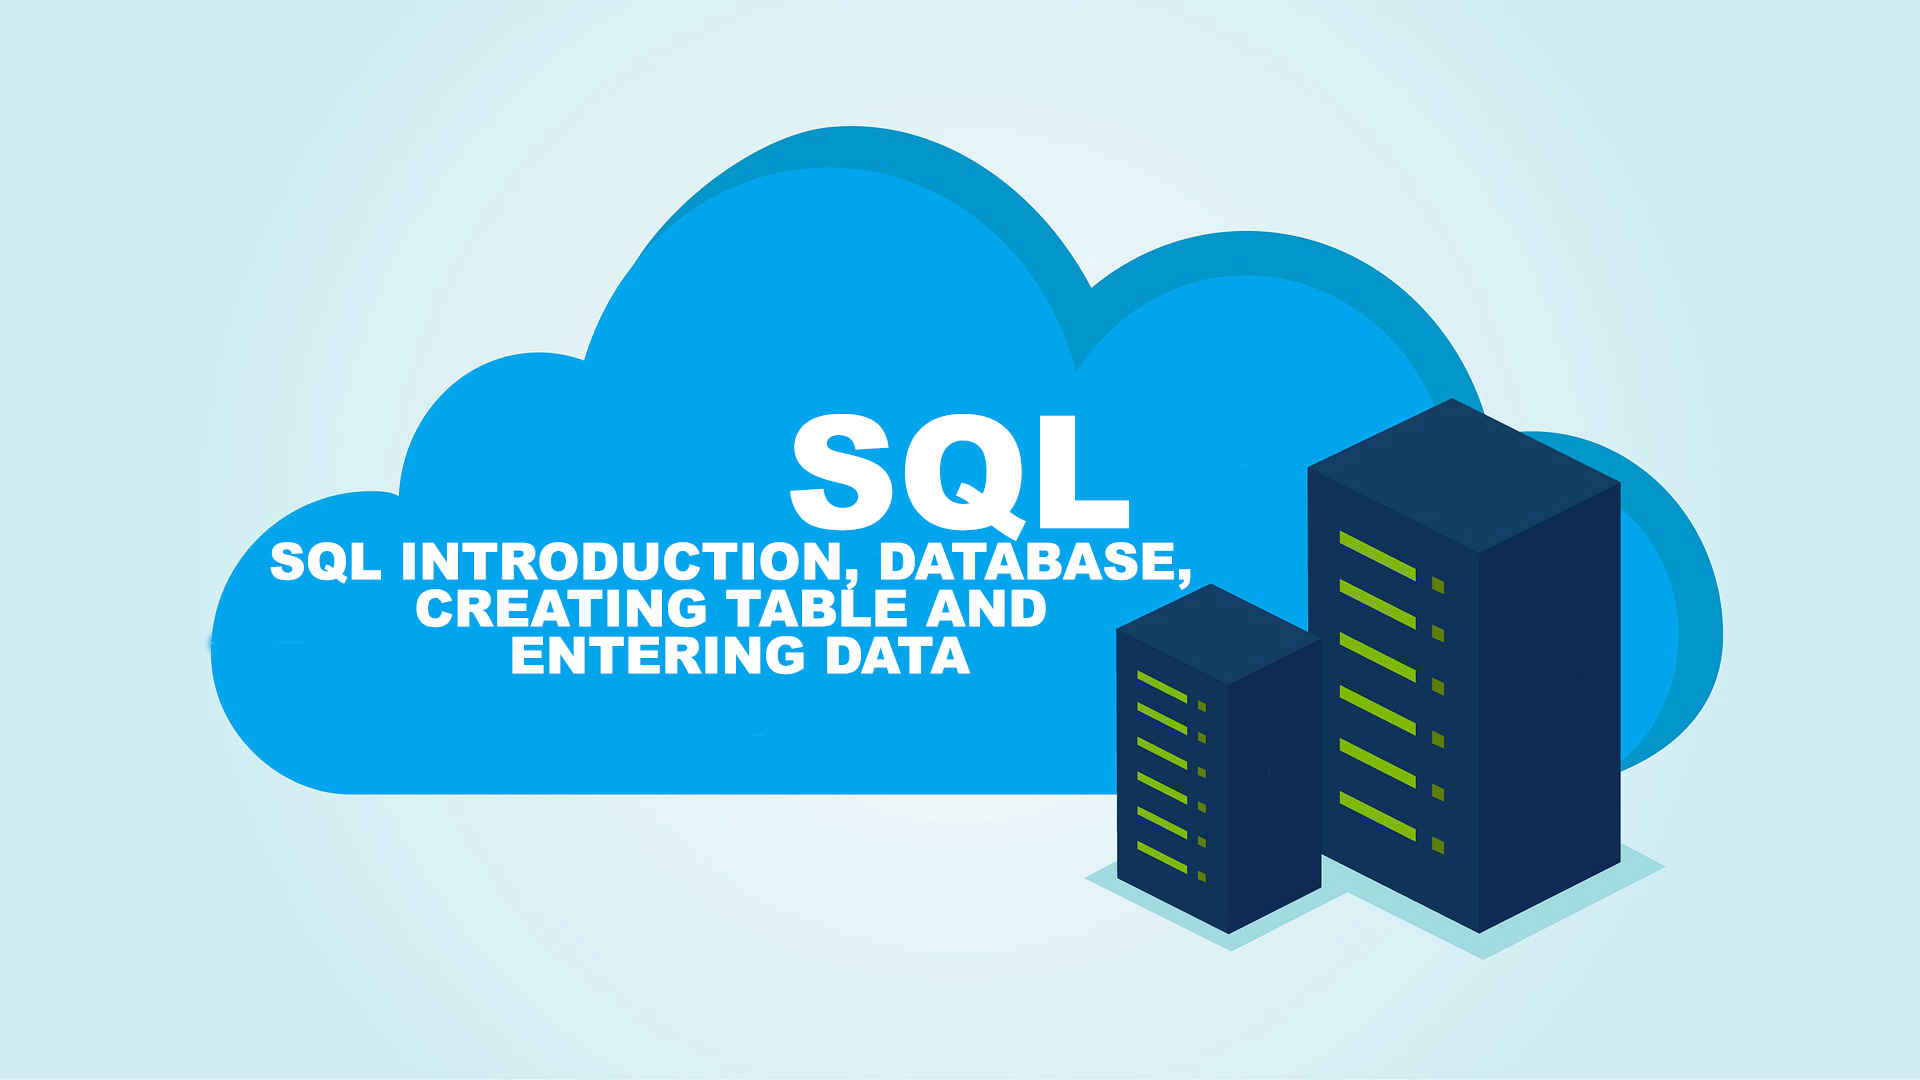 SQL Introduction, Database, Creating Table and Entering Data